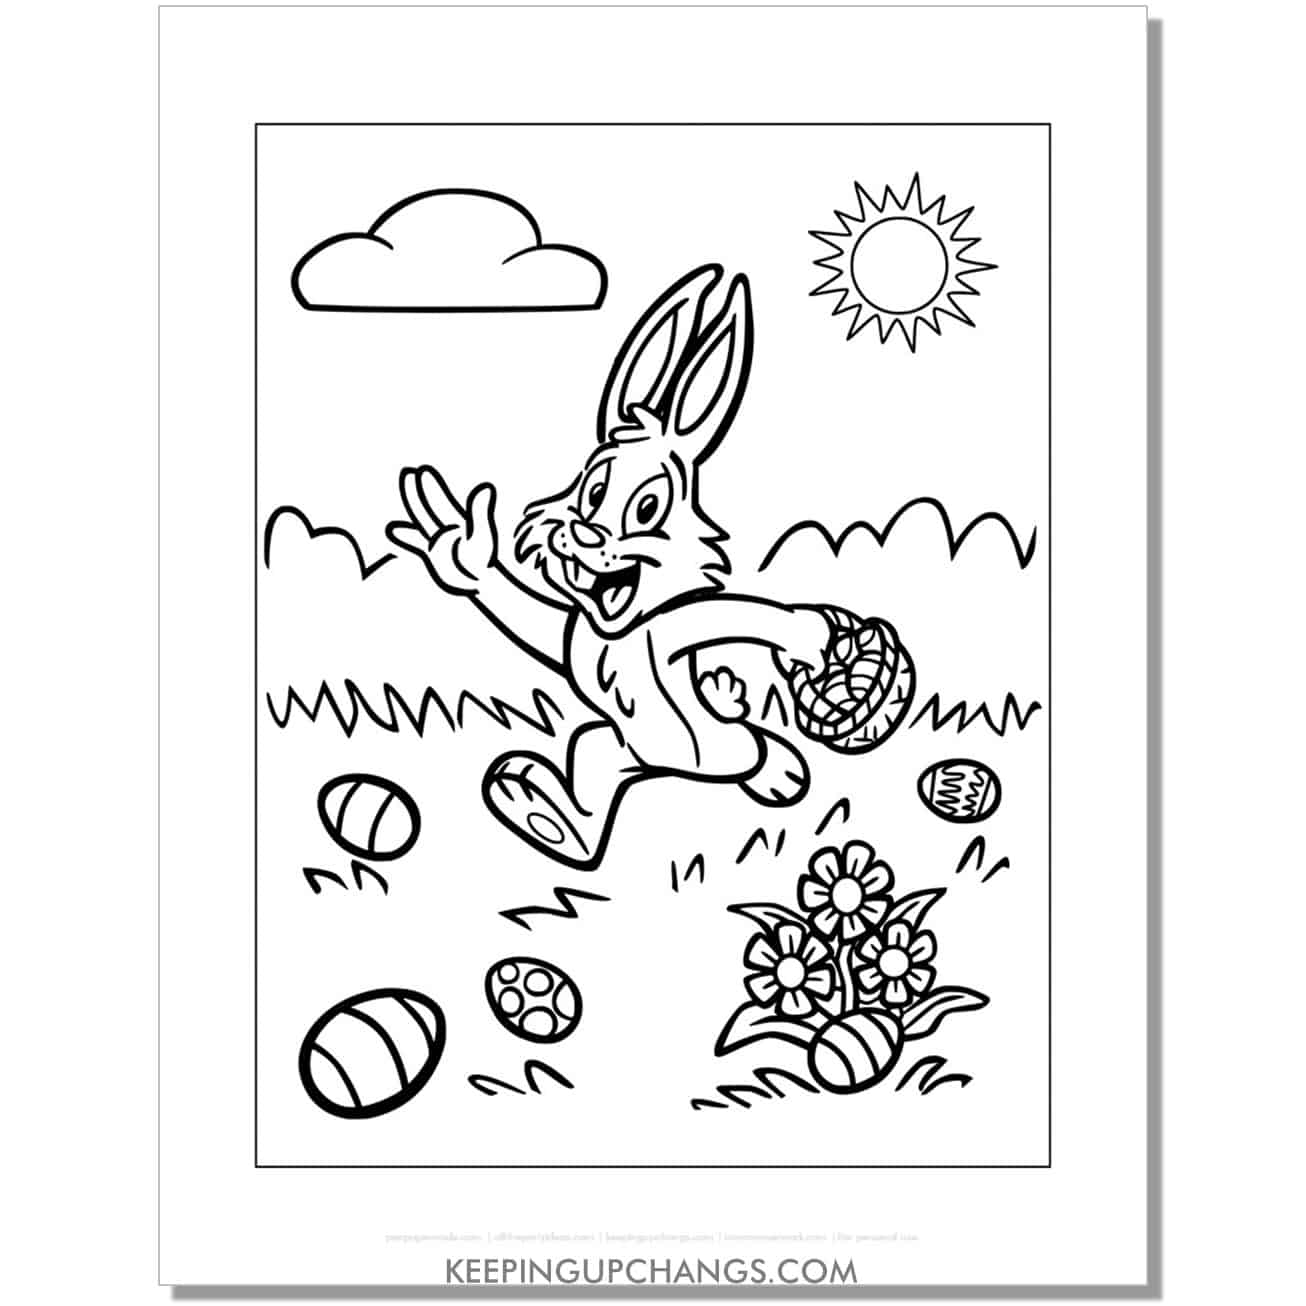 funny easter bunny on egg hunt coloring page, sheet.